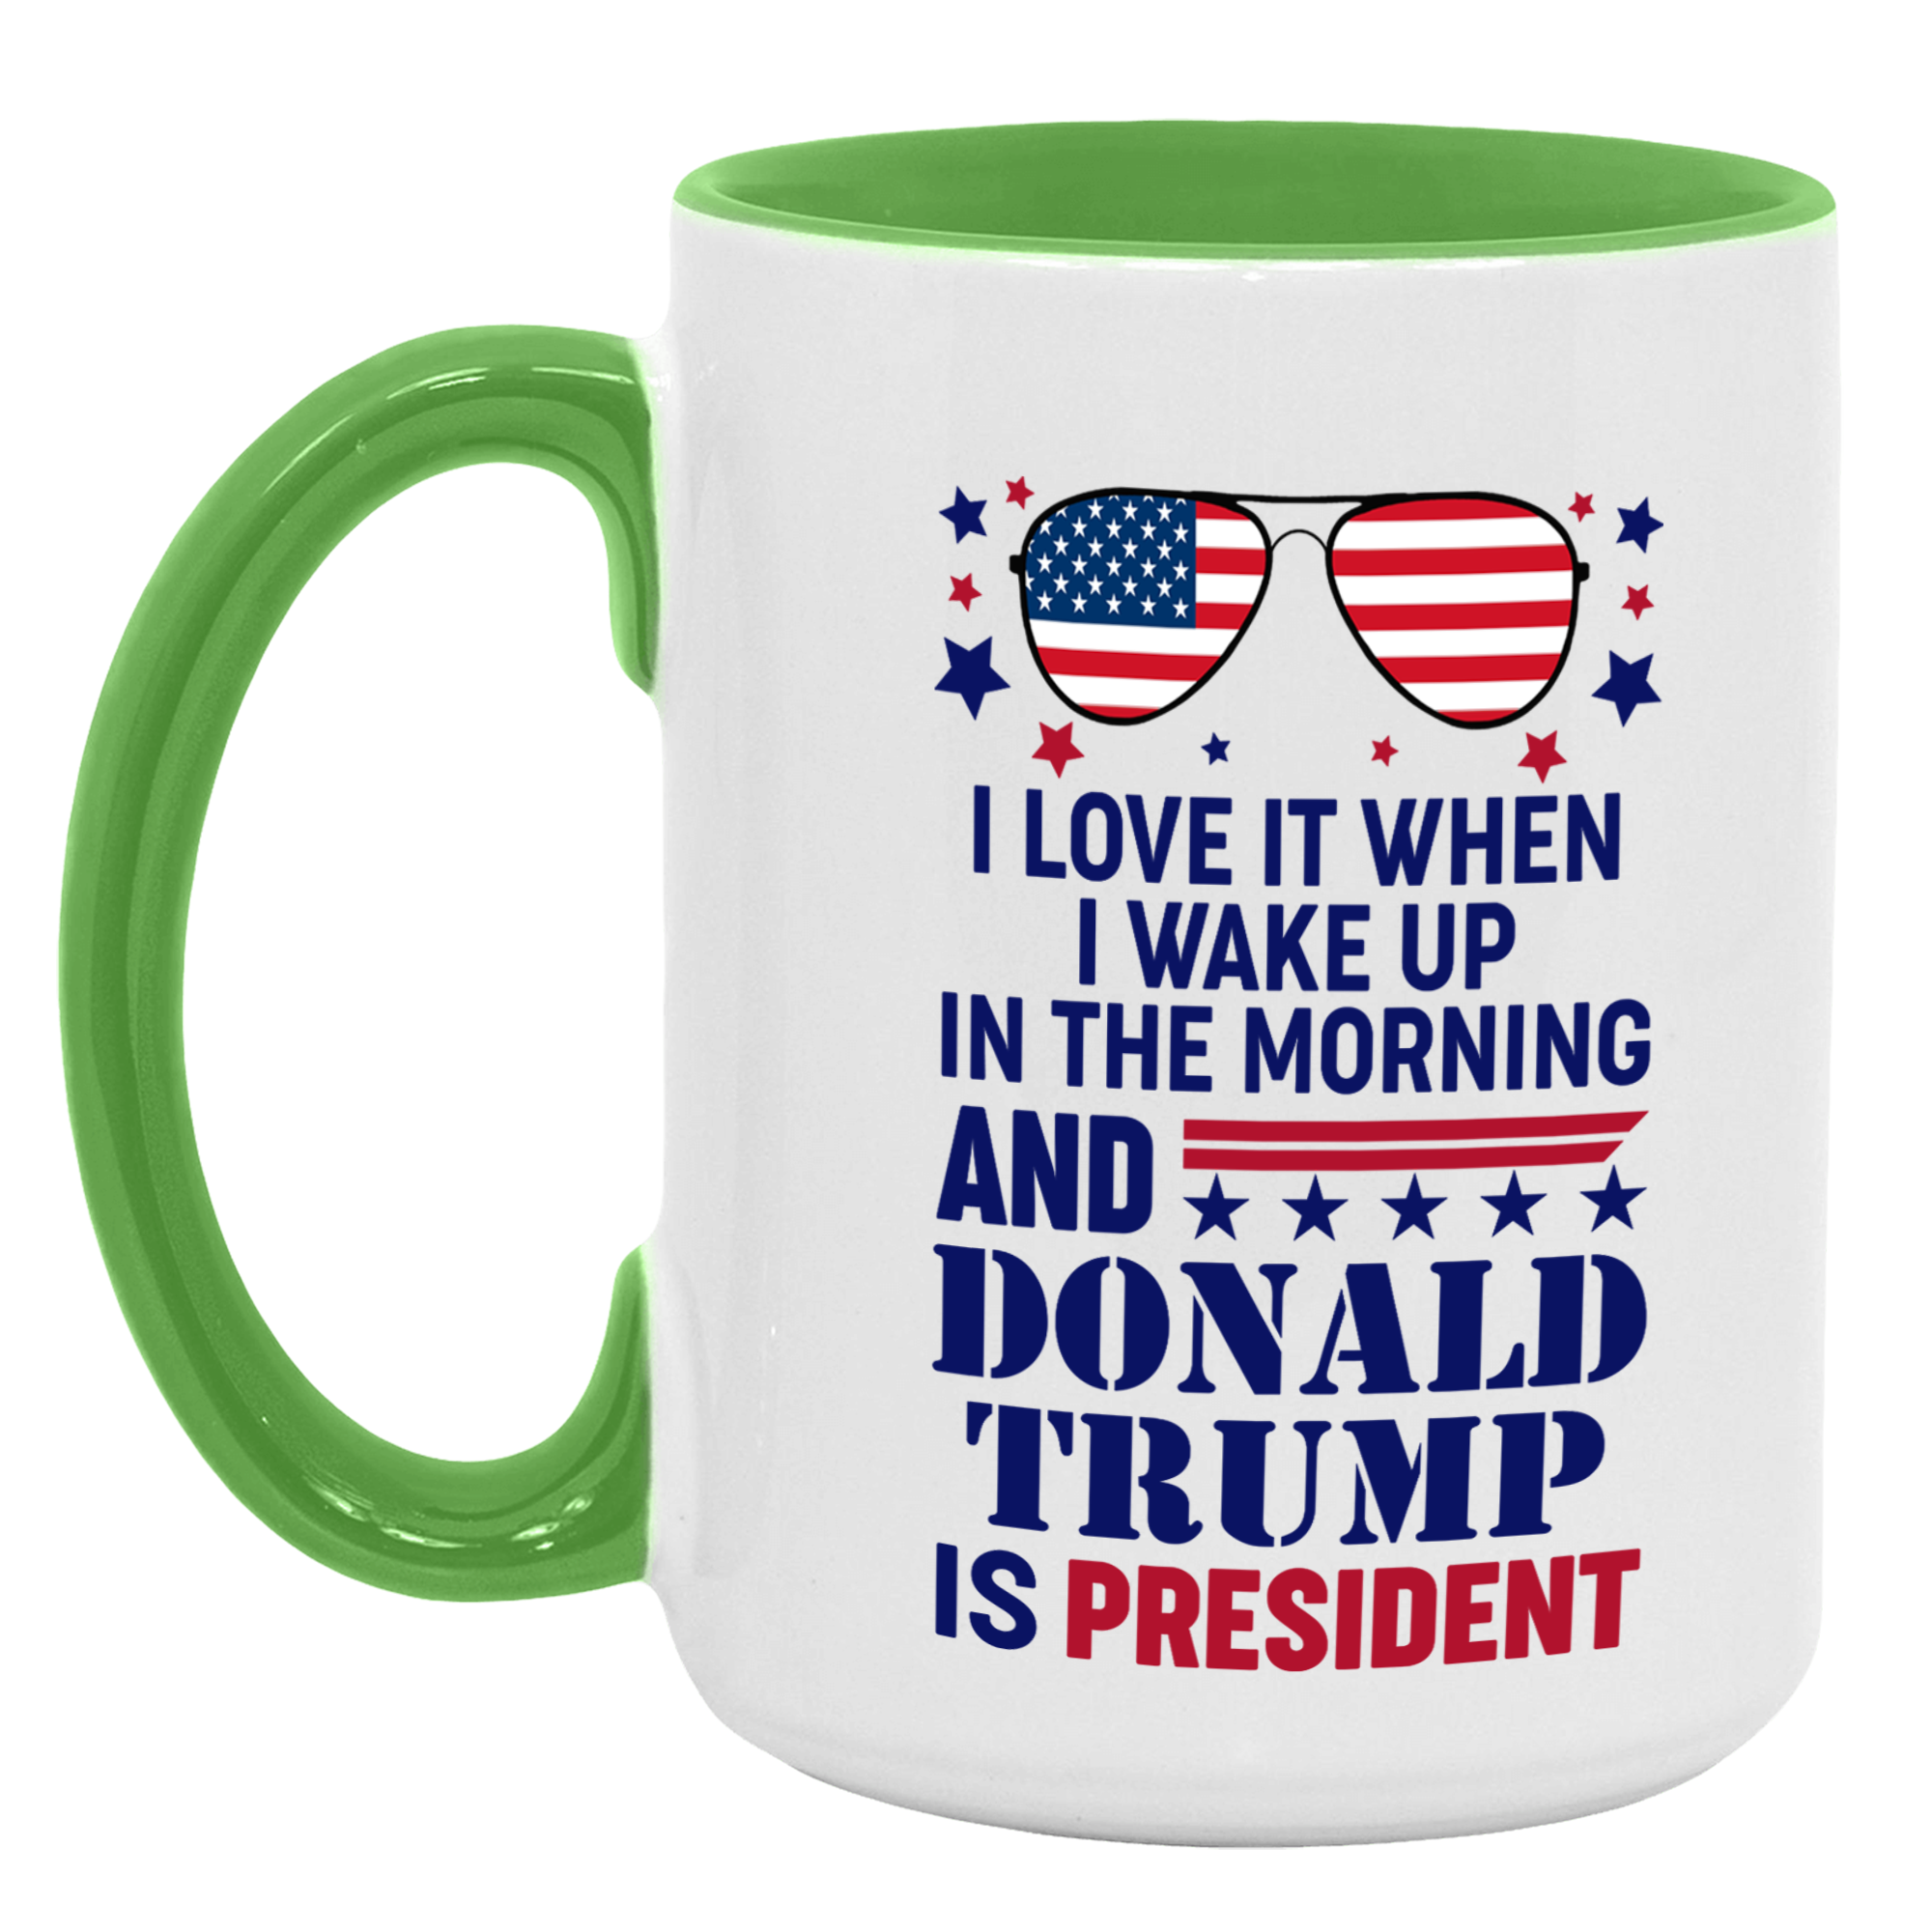 I Love It When I Wake Up In The Morning And Donald Trump Is President Mug - GB-M16